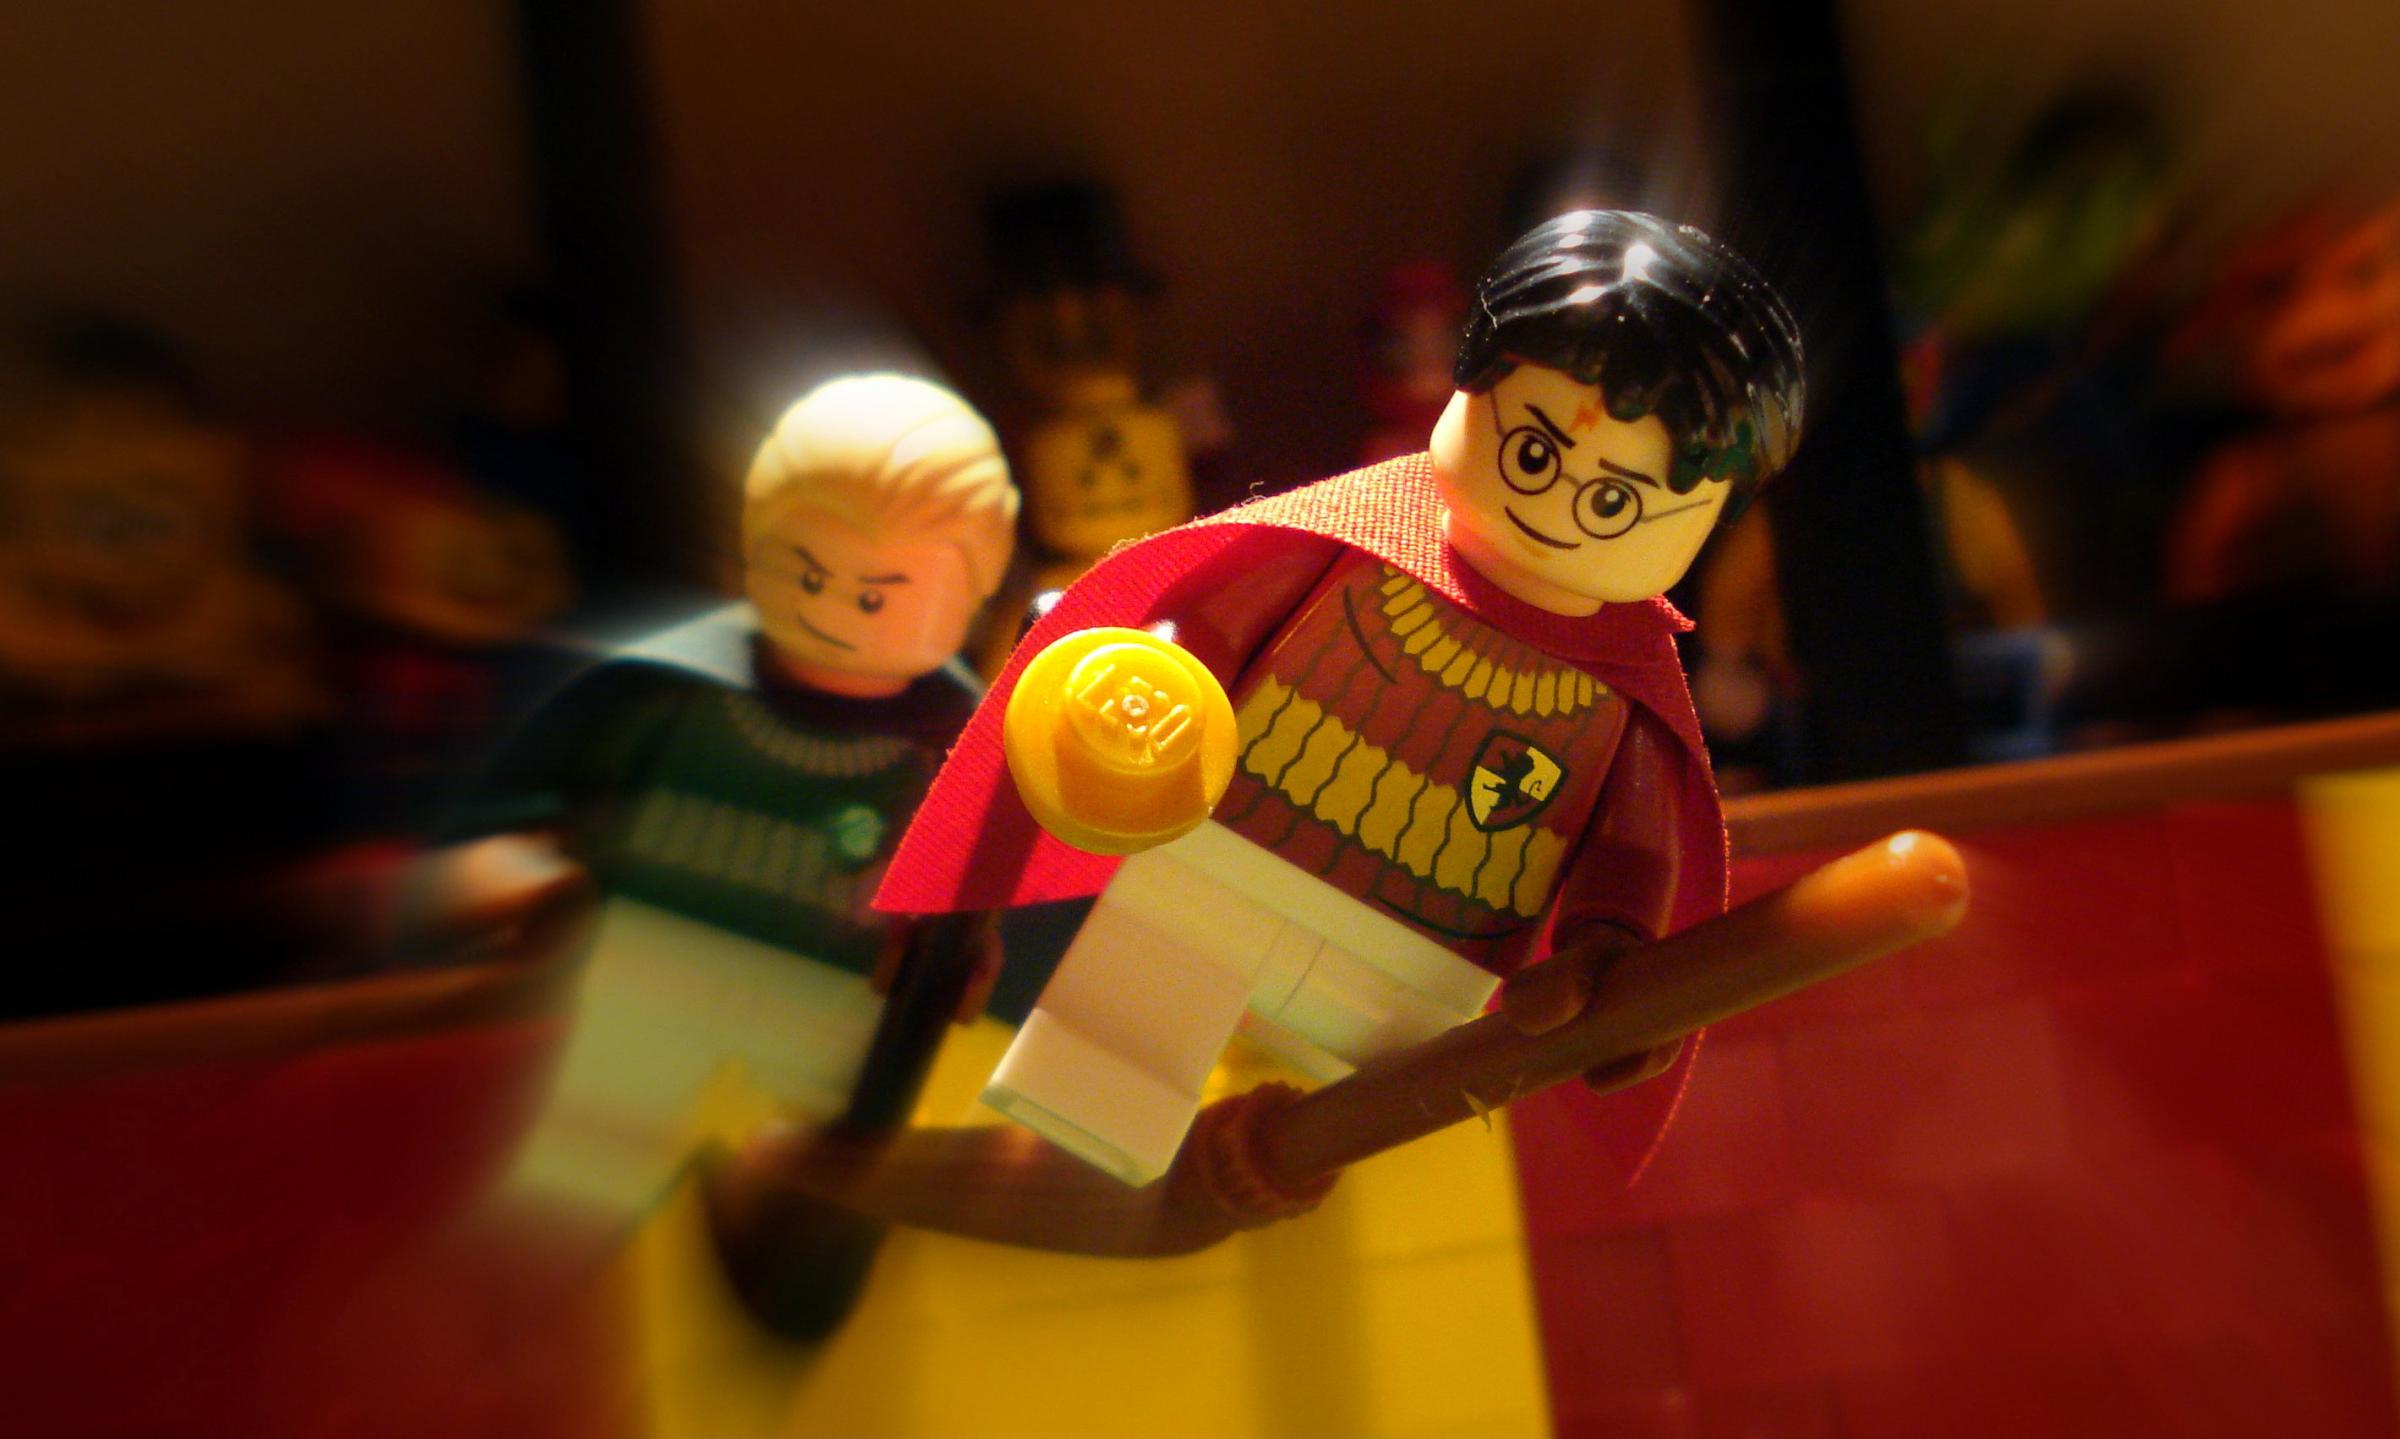 LEGO re-creation of a quidditch match from Harry Potter movies